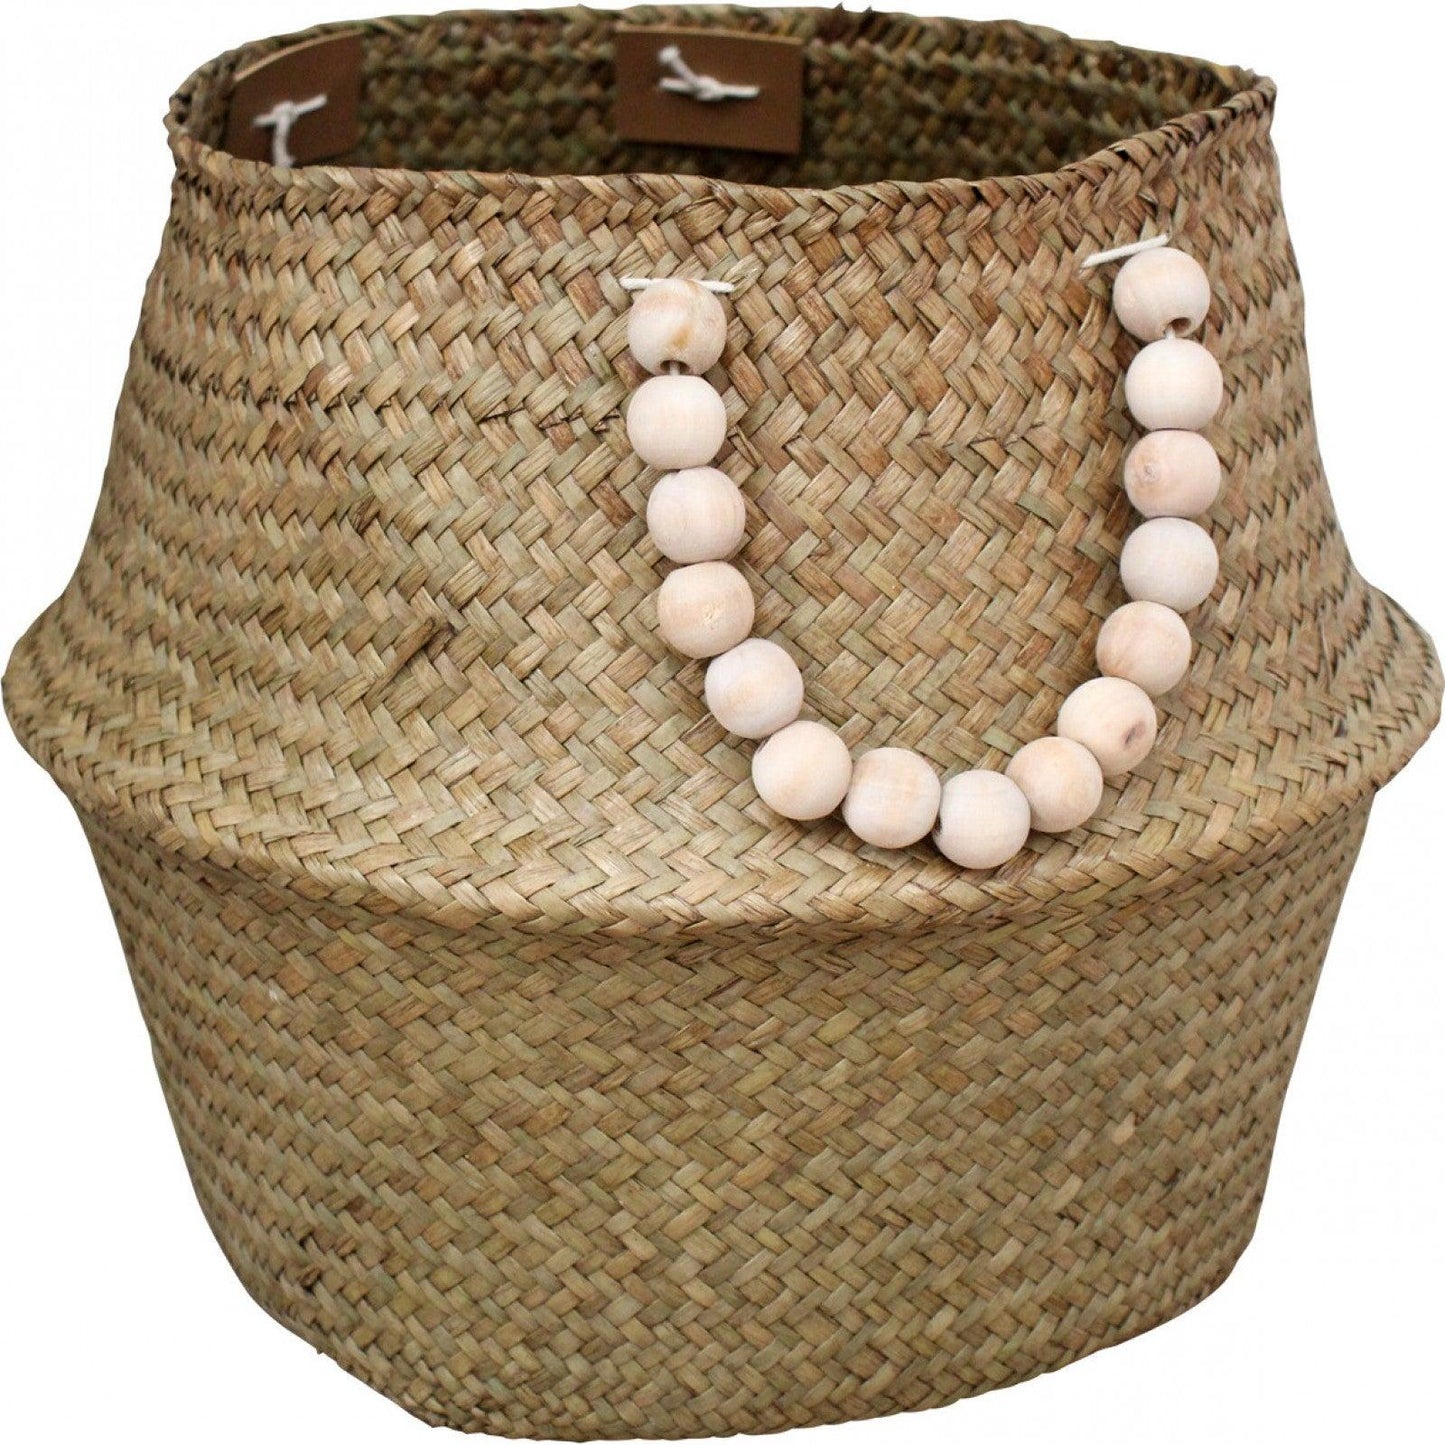 Belly Basket Natural Beads